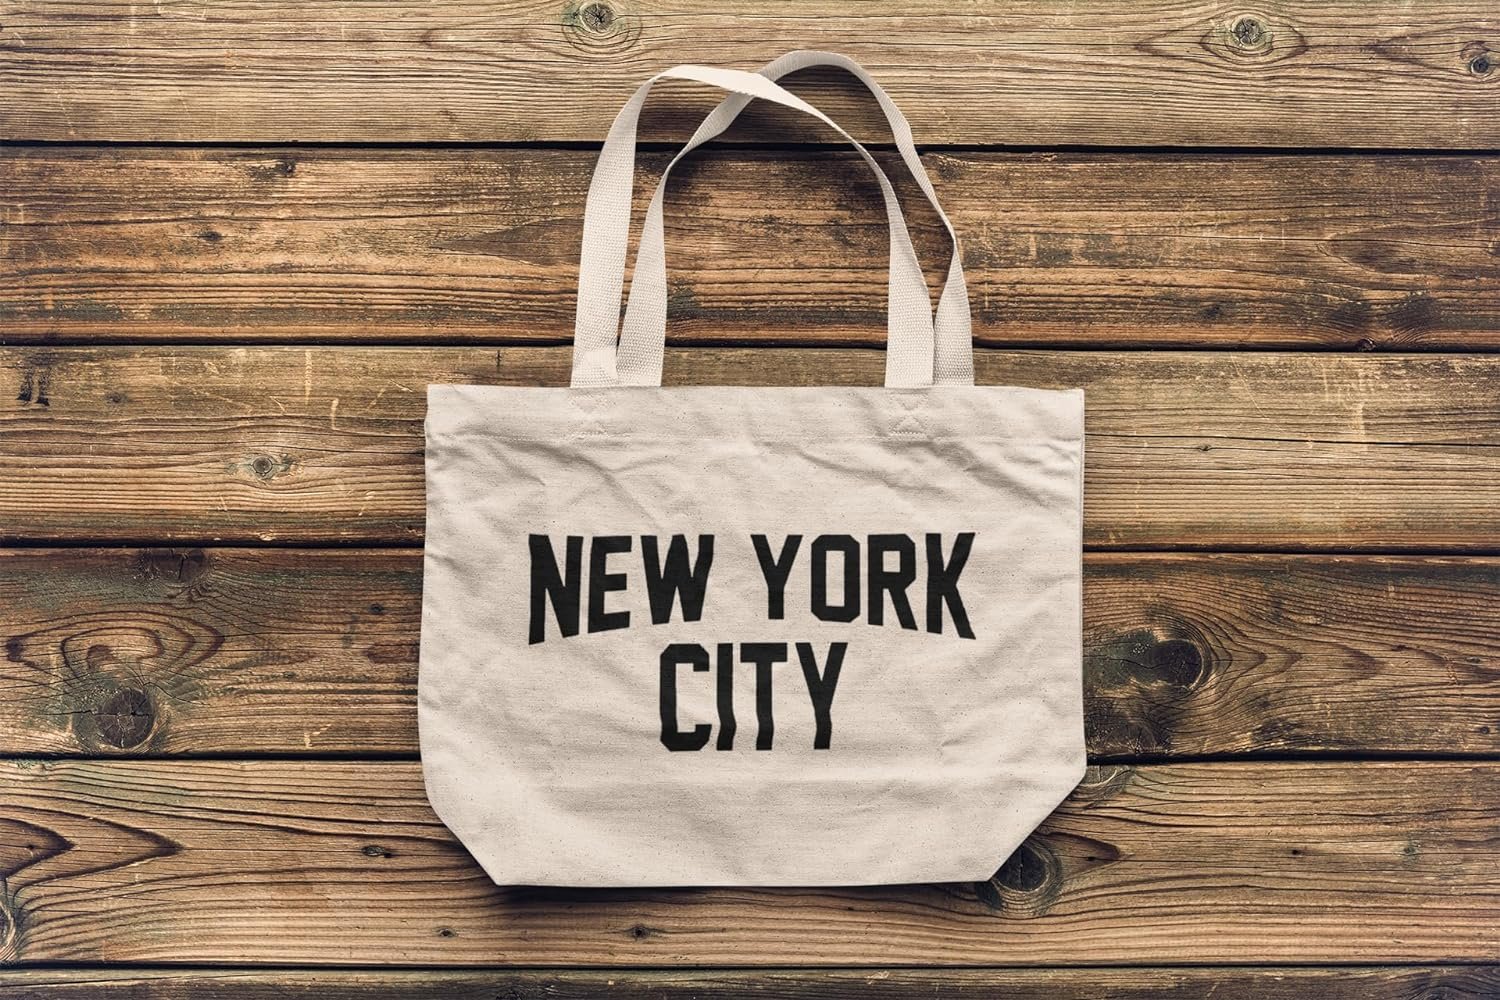 New York CIty - Jumbo Size Bag Vintage Style Retro City Cotton Canvas NYC Tote Bags